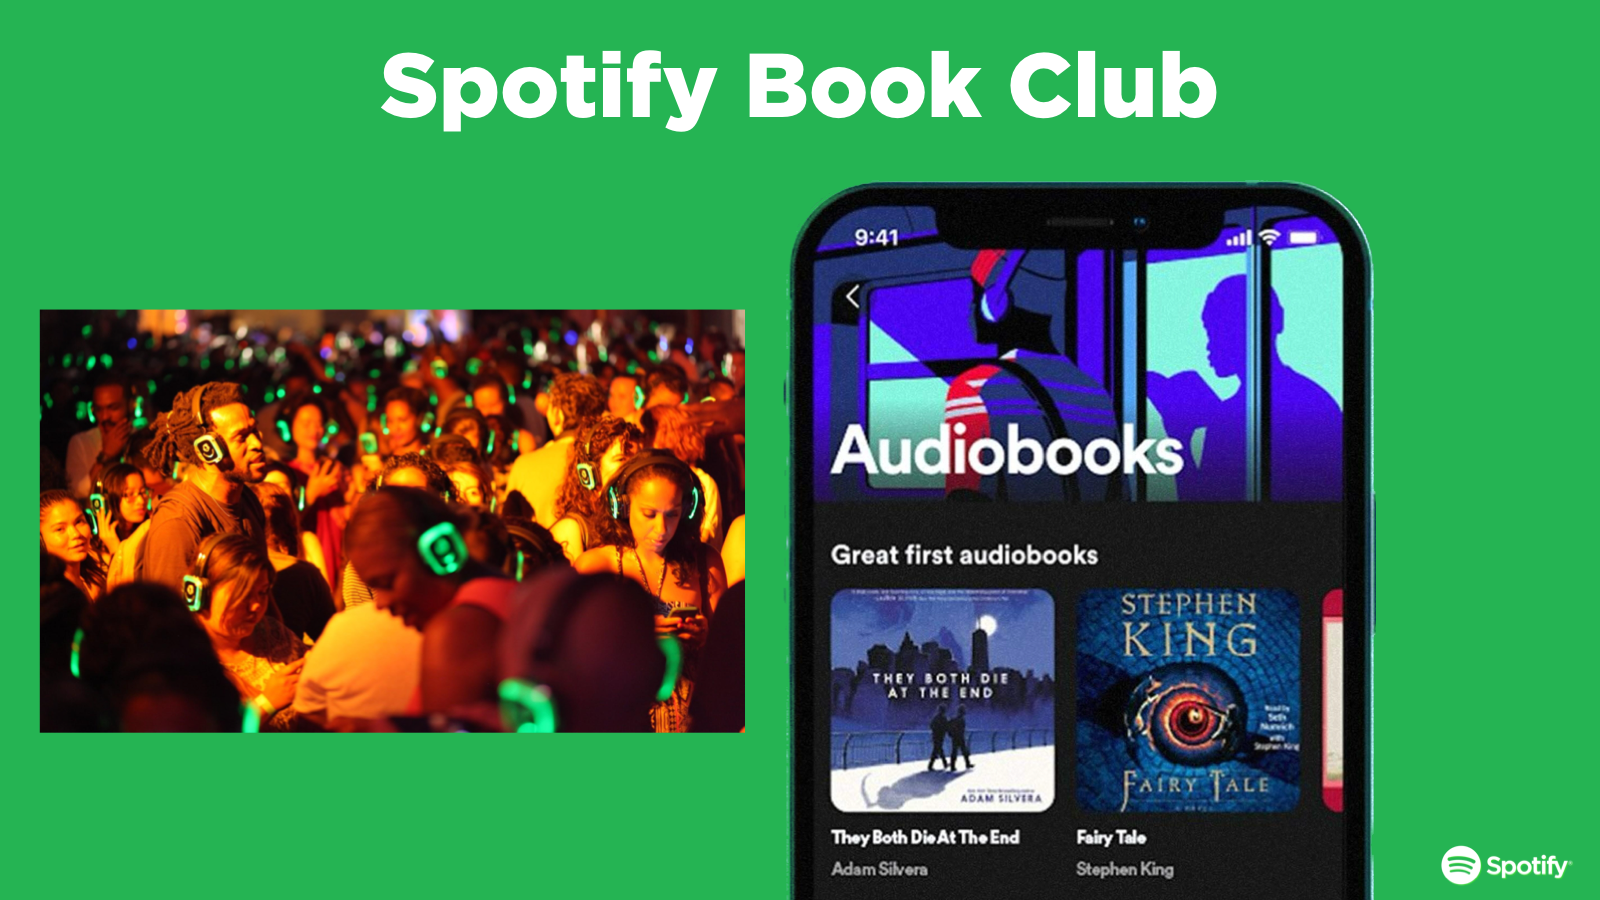  Spotify is known for giving its users the best in-app experience with music, podcasts, and even video services. The idea is to create an experience that celebrates the new audiobook content and rewards the listeners. 